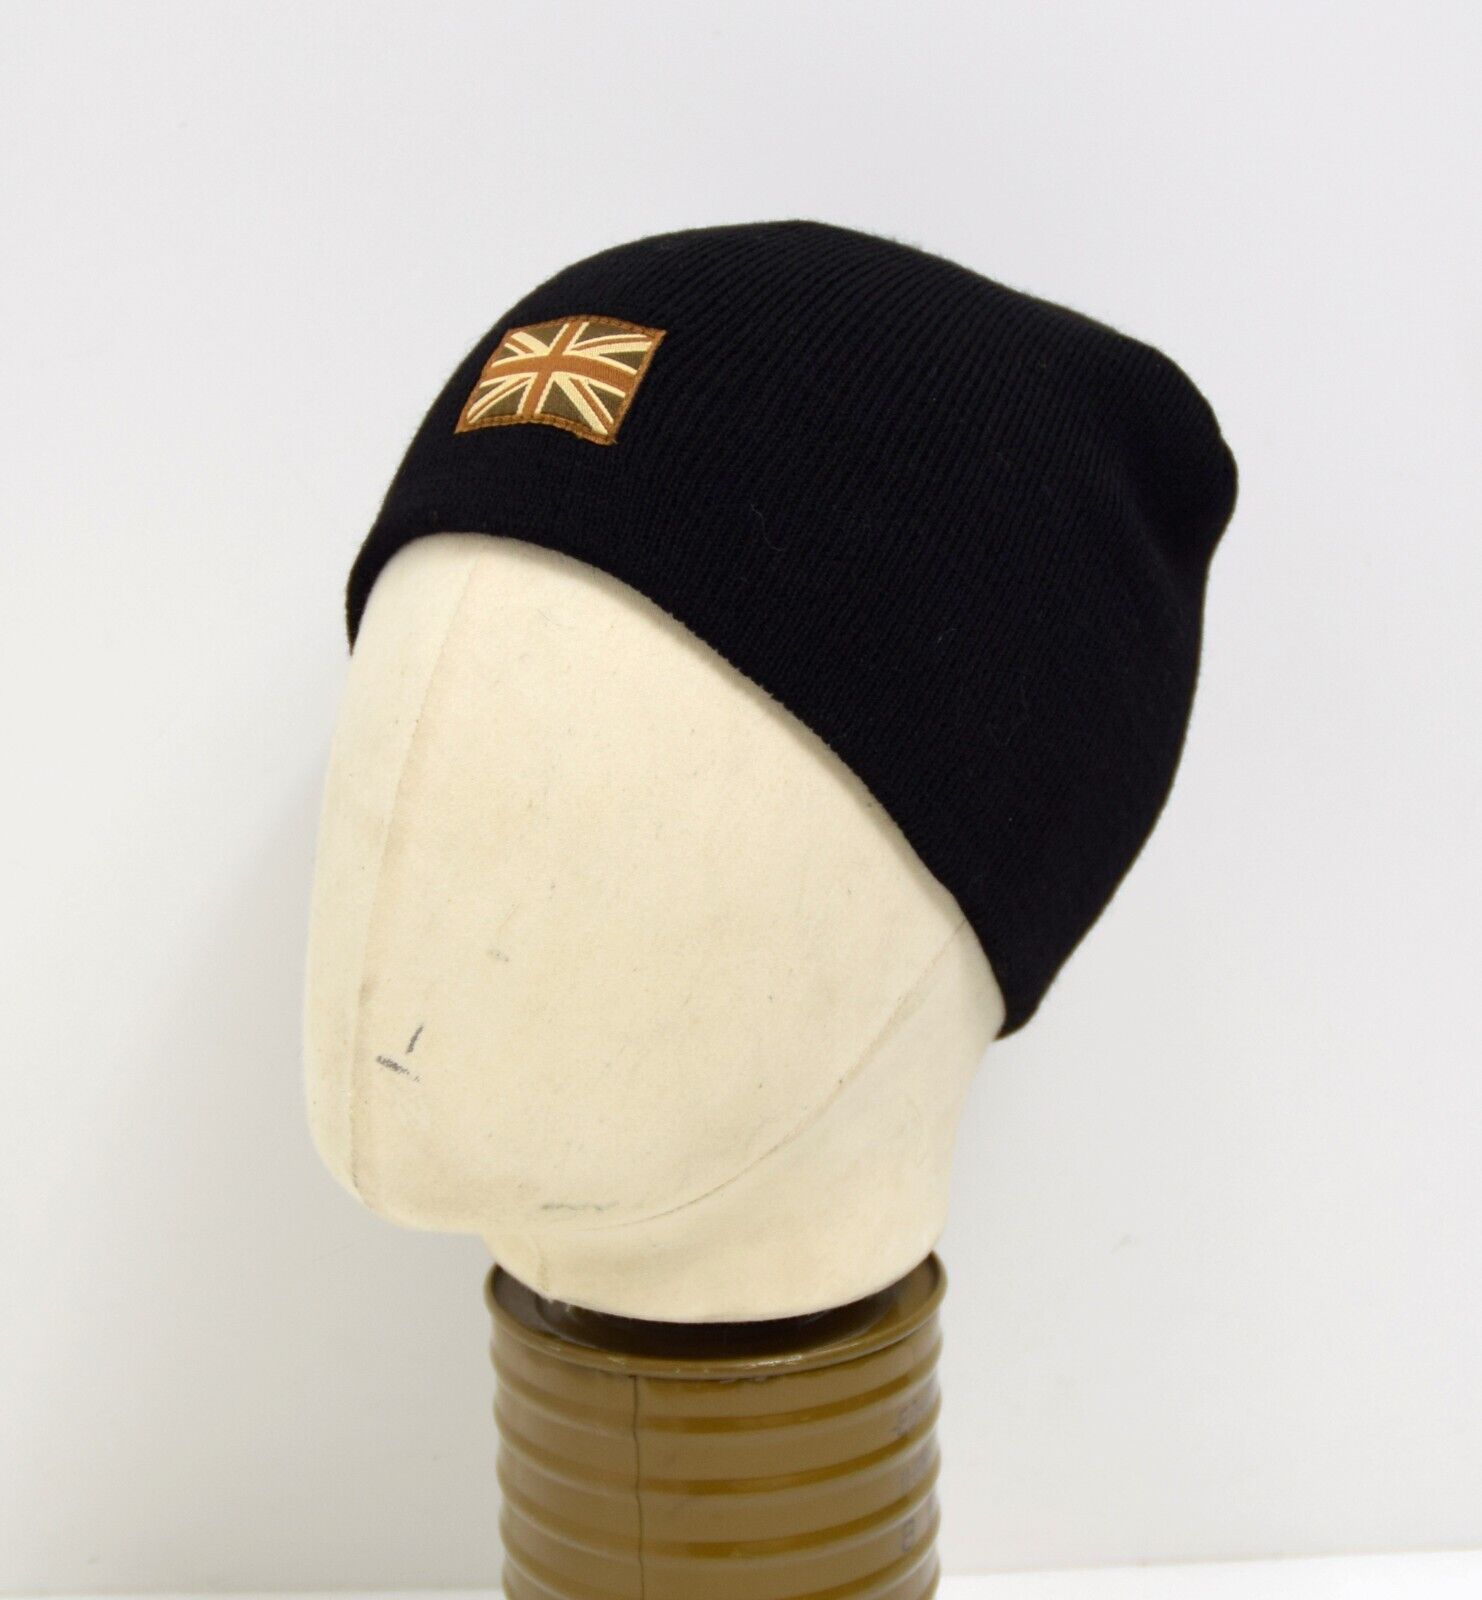 GB Flag Beanie Hat Watch Cap British Army Style Cold Weather Hat